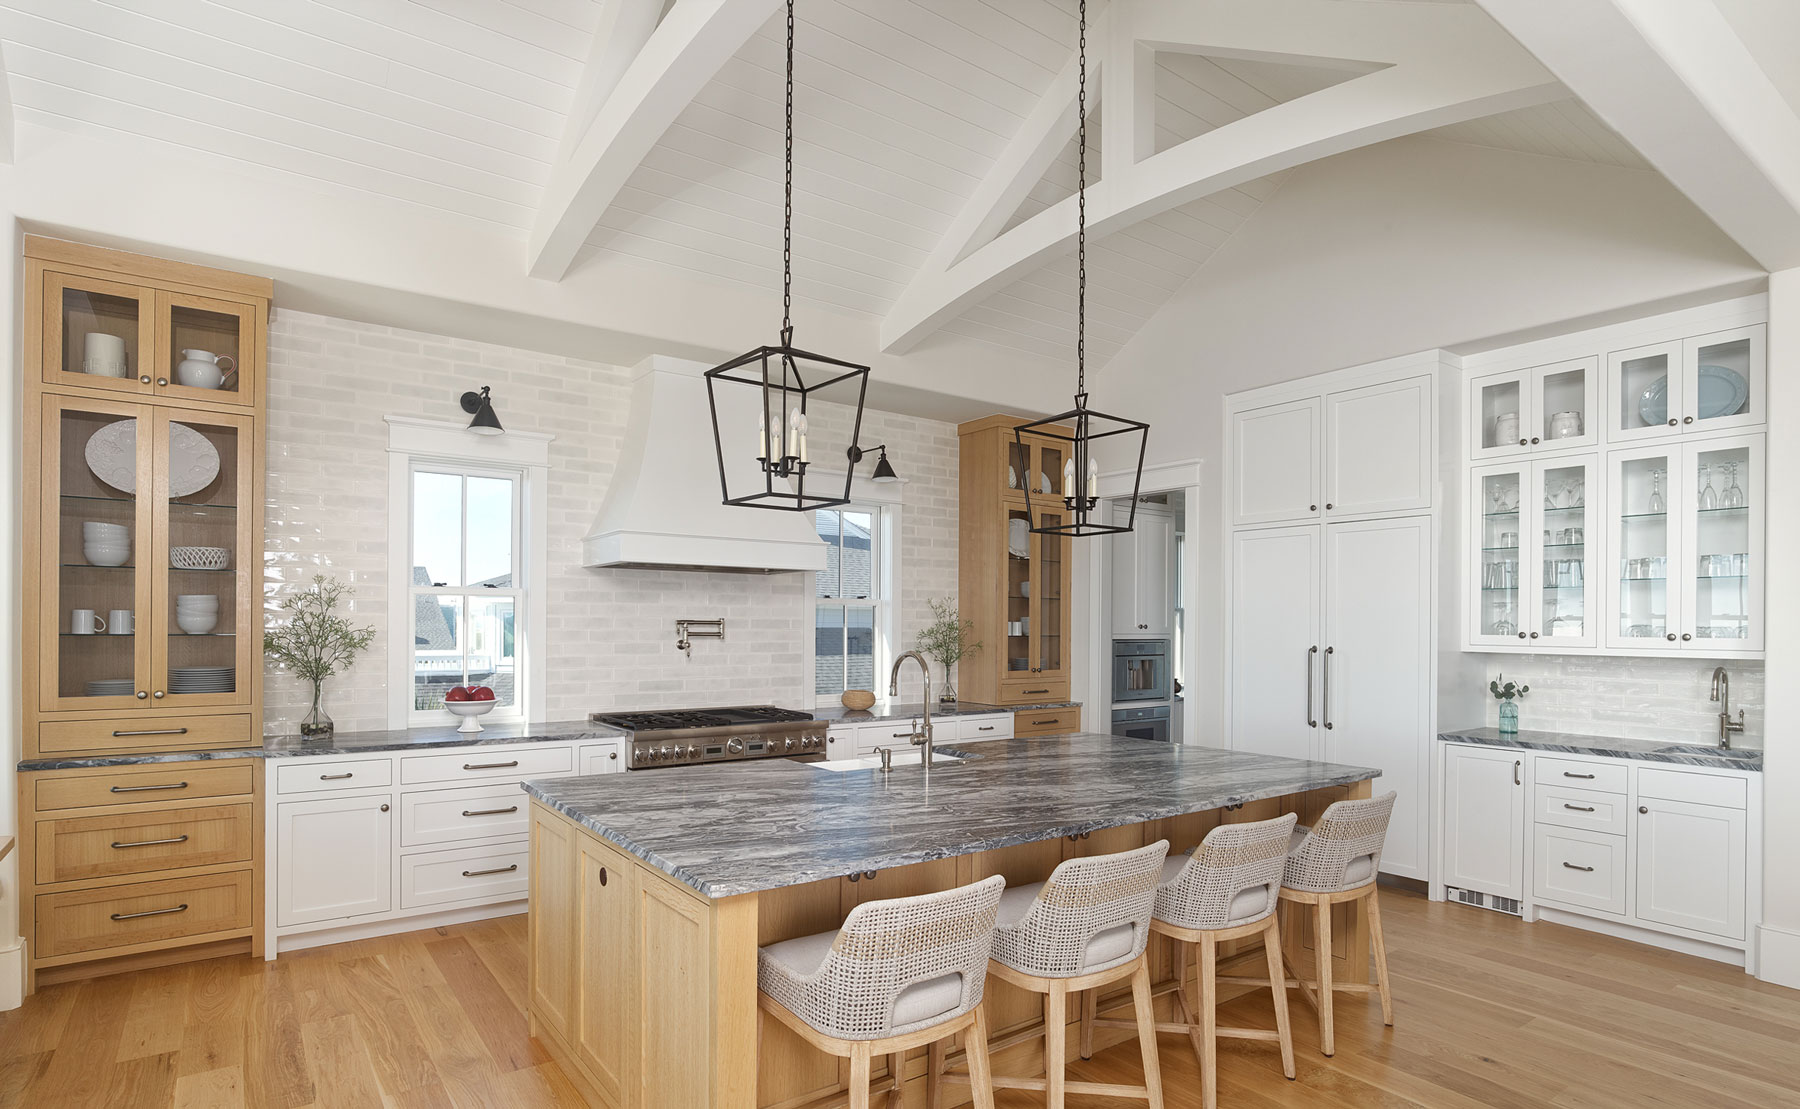 Large, luxury coastal kitchen with custom oak and painted white cabinets, center island, hidden appliances and back kitchen